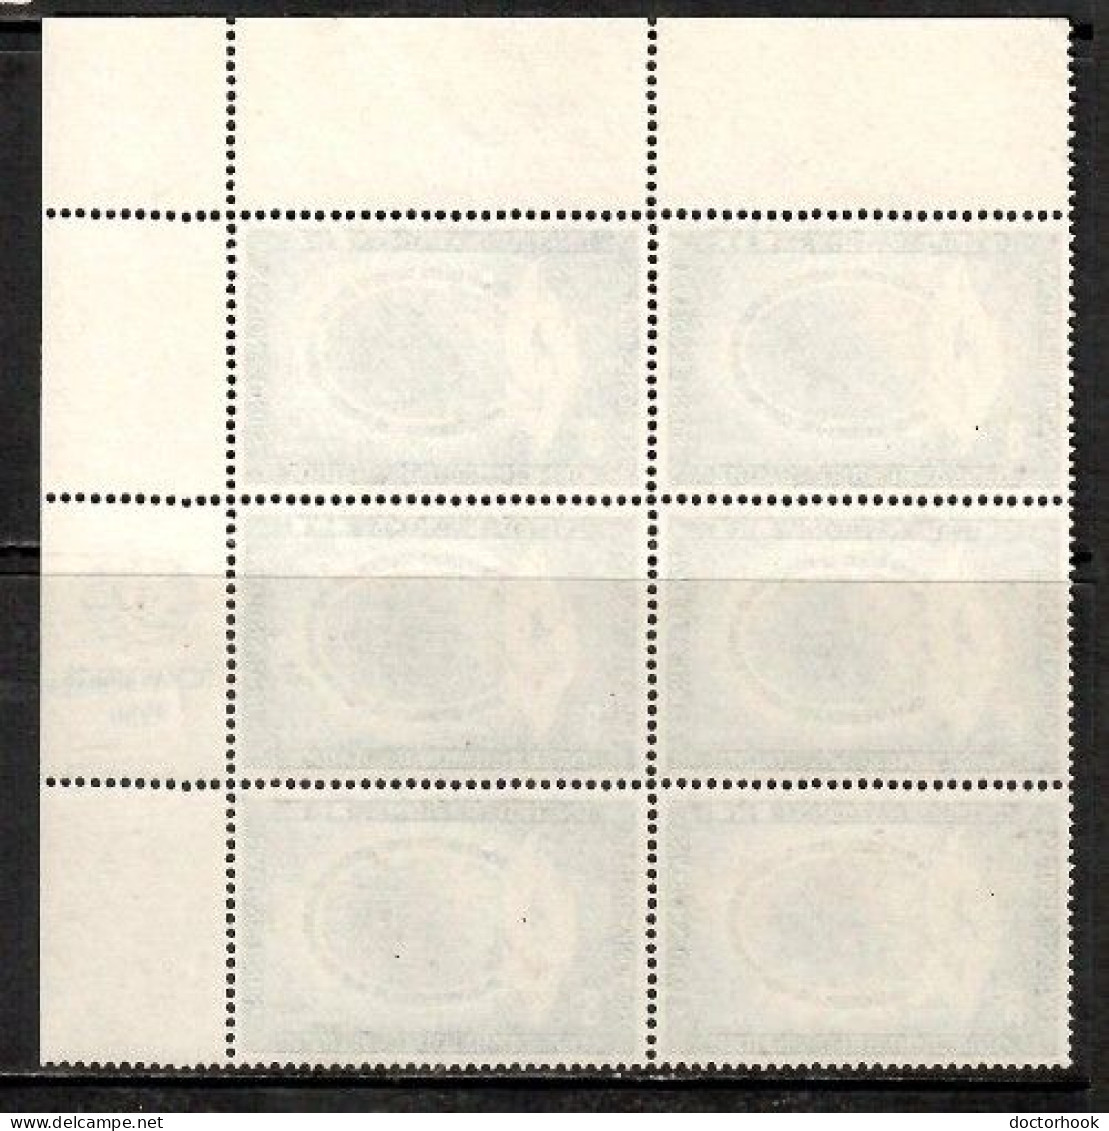 UNITED NATIONS---N.Y.  Scott # 48** MINT NH INSCRIPTION BLOCK Of 6 (CONDITION AS PER SCAN) (LG-1697) - Ungebraucht